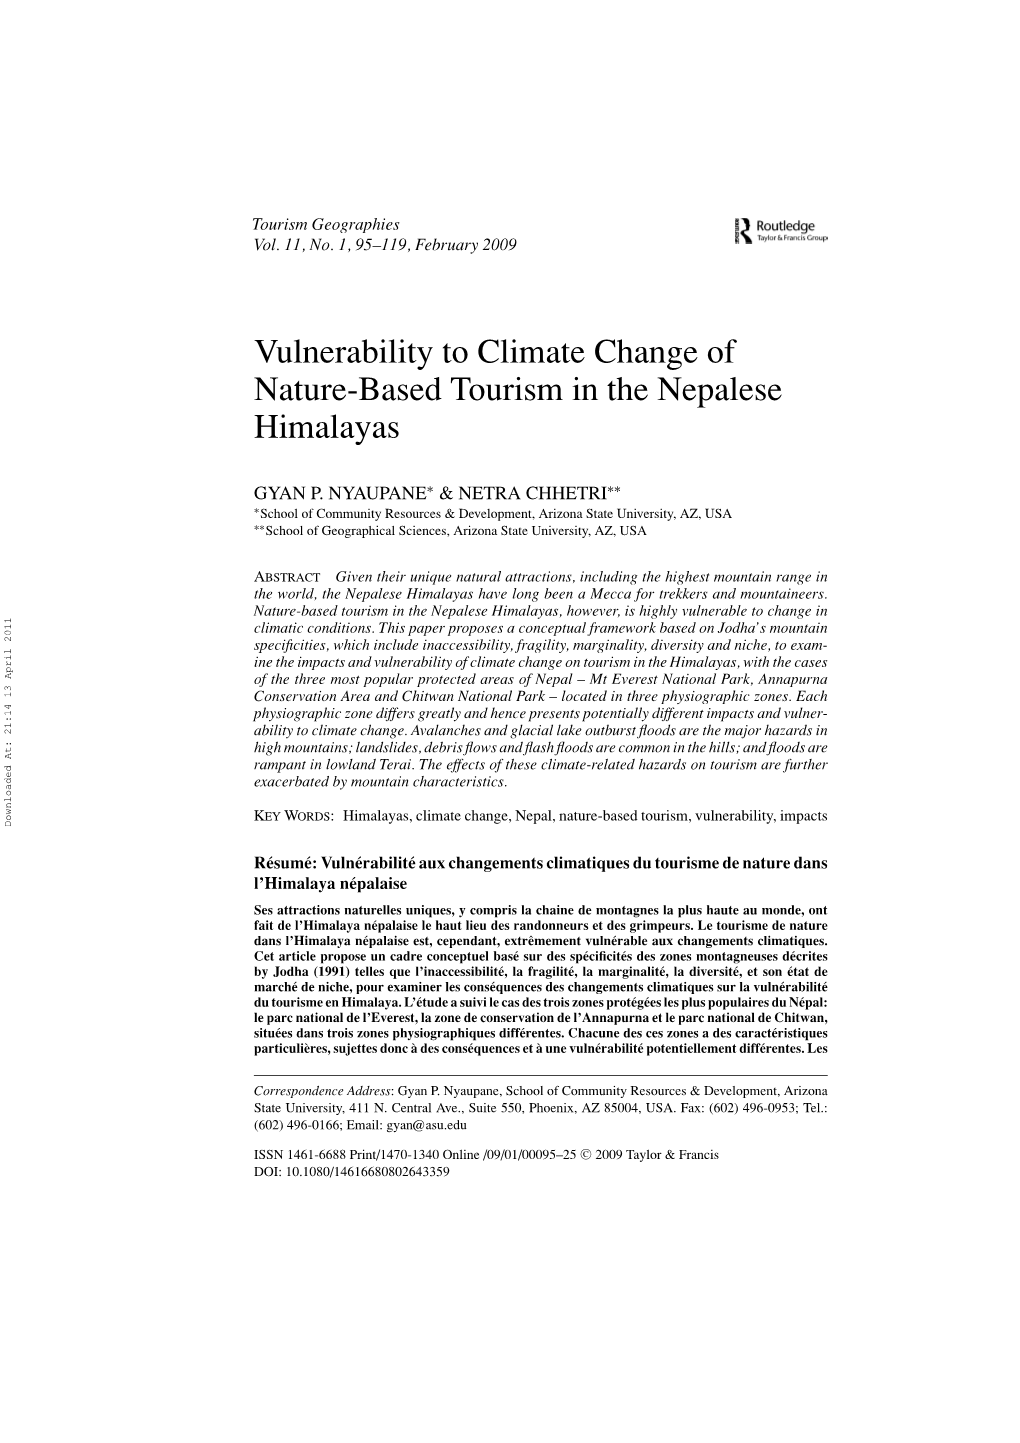 Vulnerability to Climate Change of Nature-Based Tourism in the Nepalese Himalayas